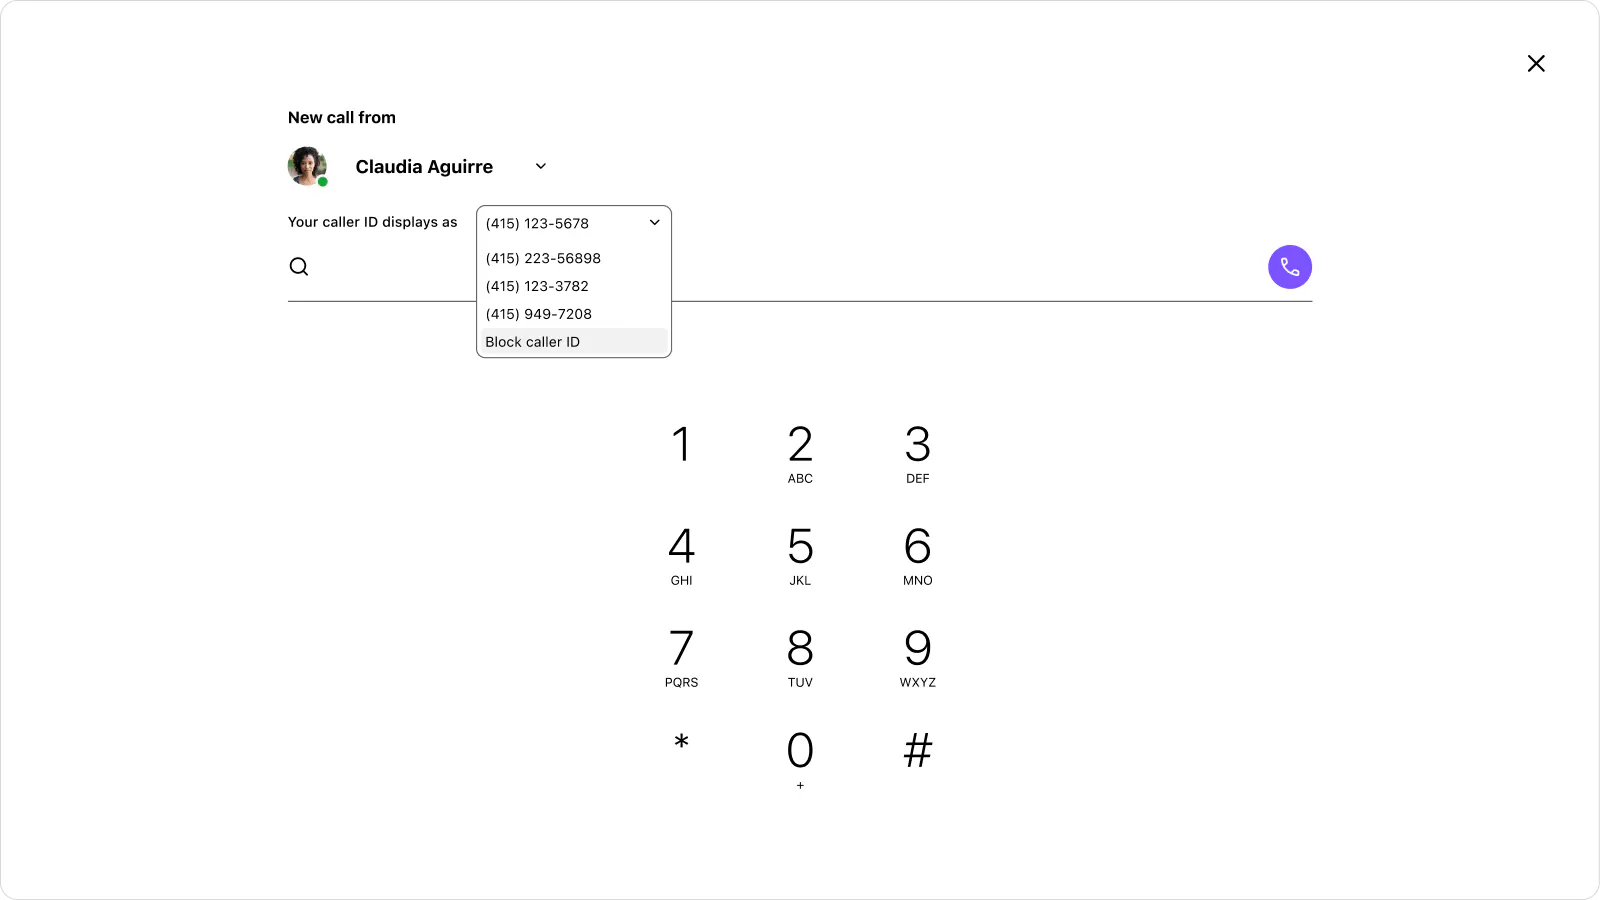 Screenshot of choosing a caller ID to display when making a work call from one's personal cell phone using Dialpad's app